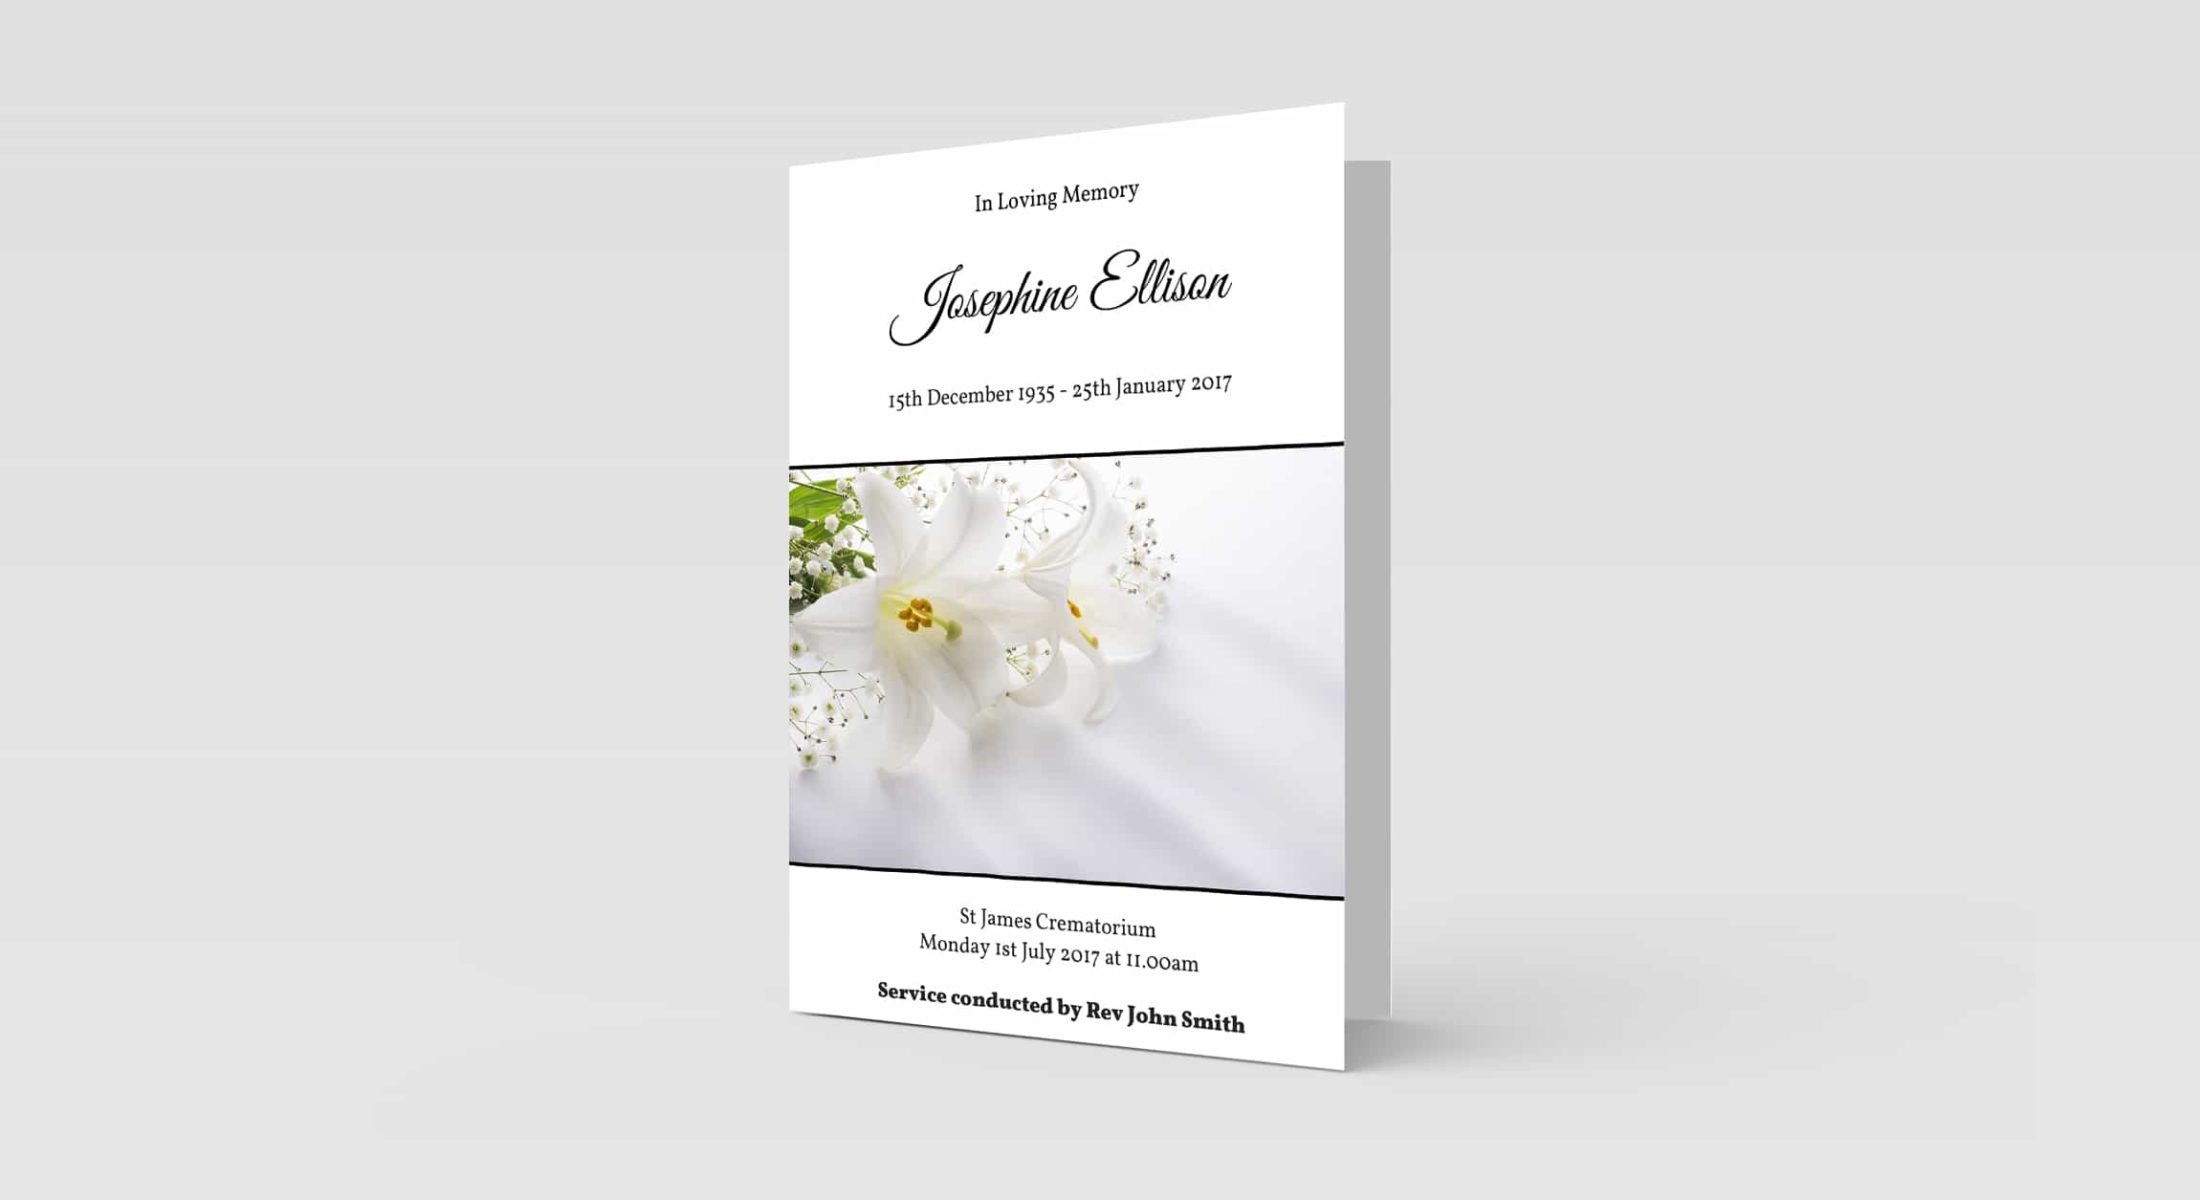 Funeral Order Of Service – White Lilies Photo Personalised Design – High Quality Print – Heavy 300g Card – Qty (10x) – Memorial Booklet